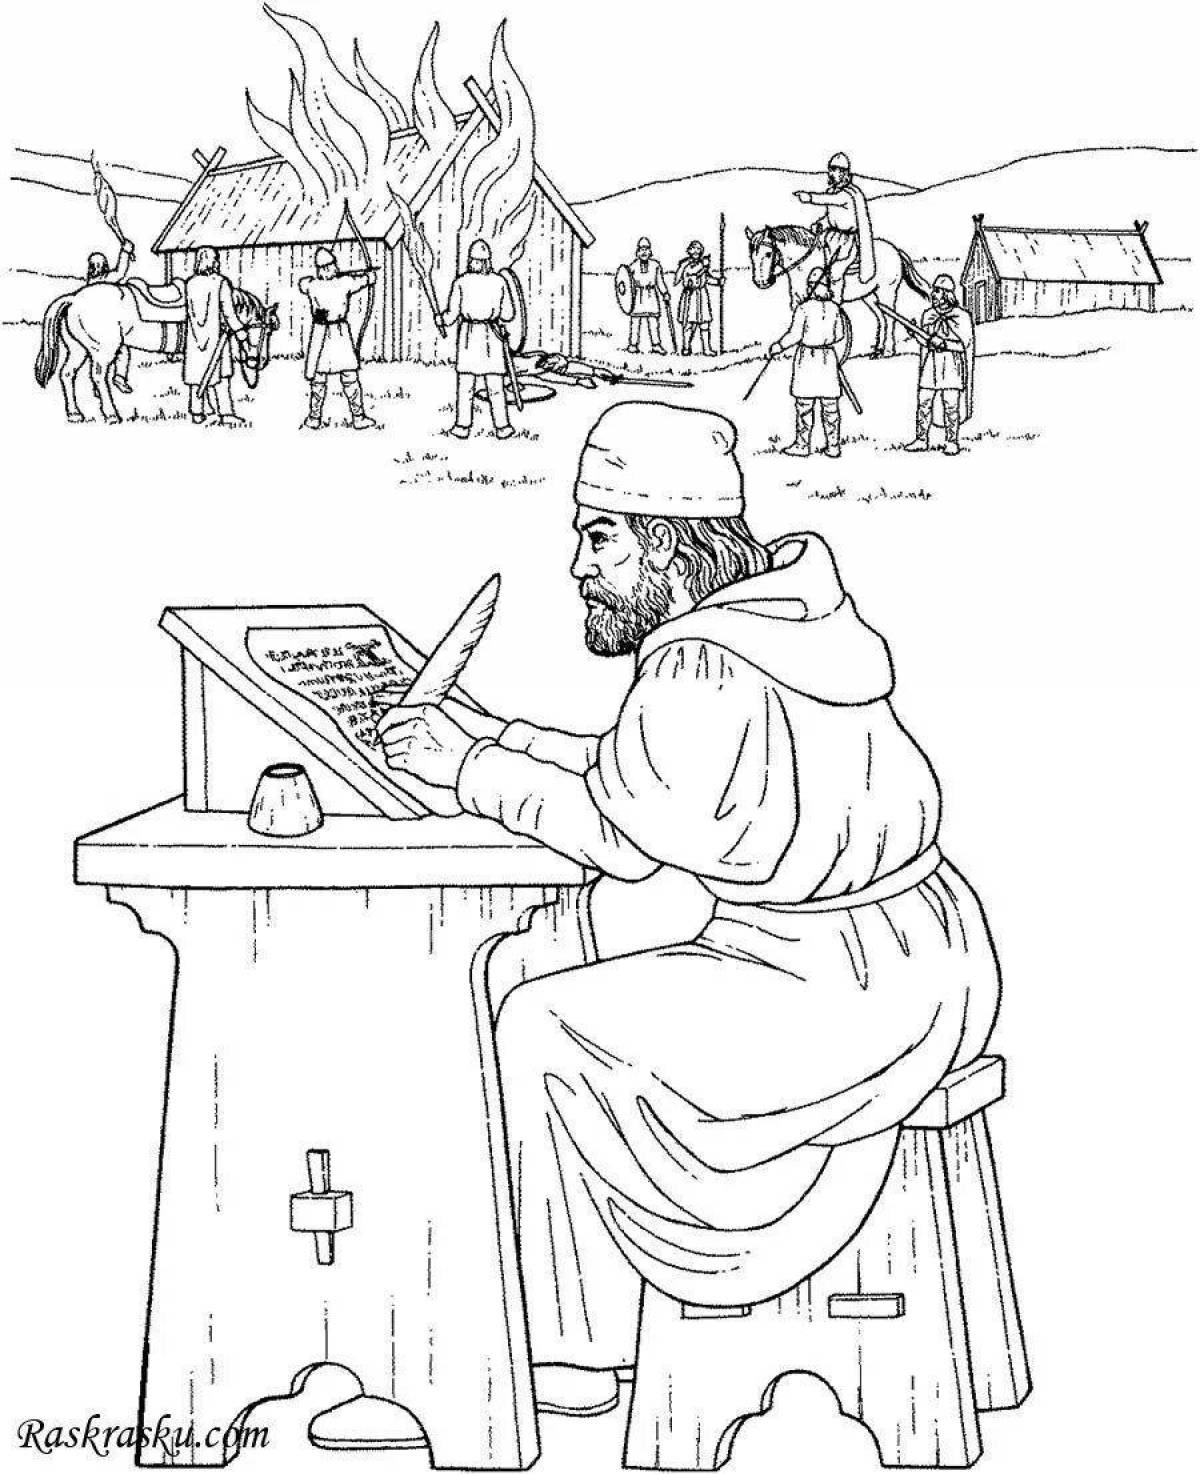 Amazing historical coloring book for kids